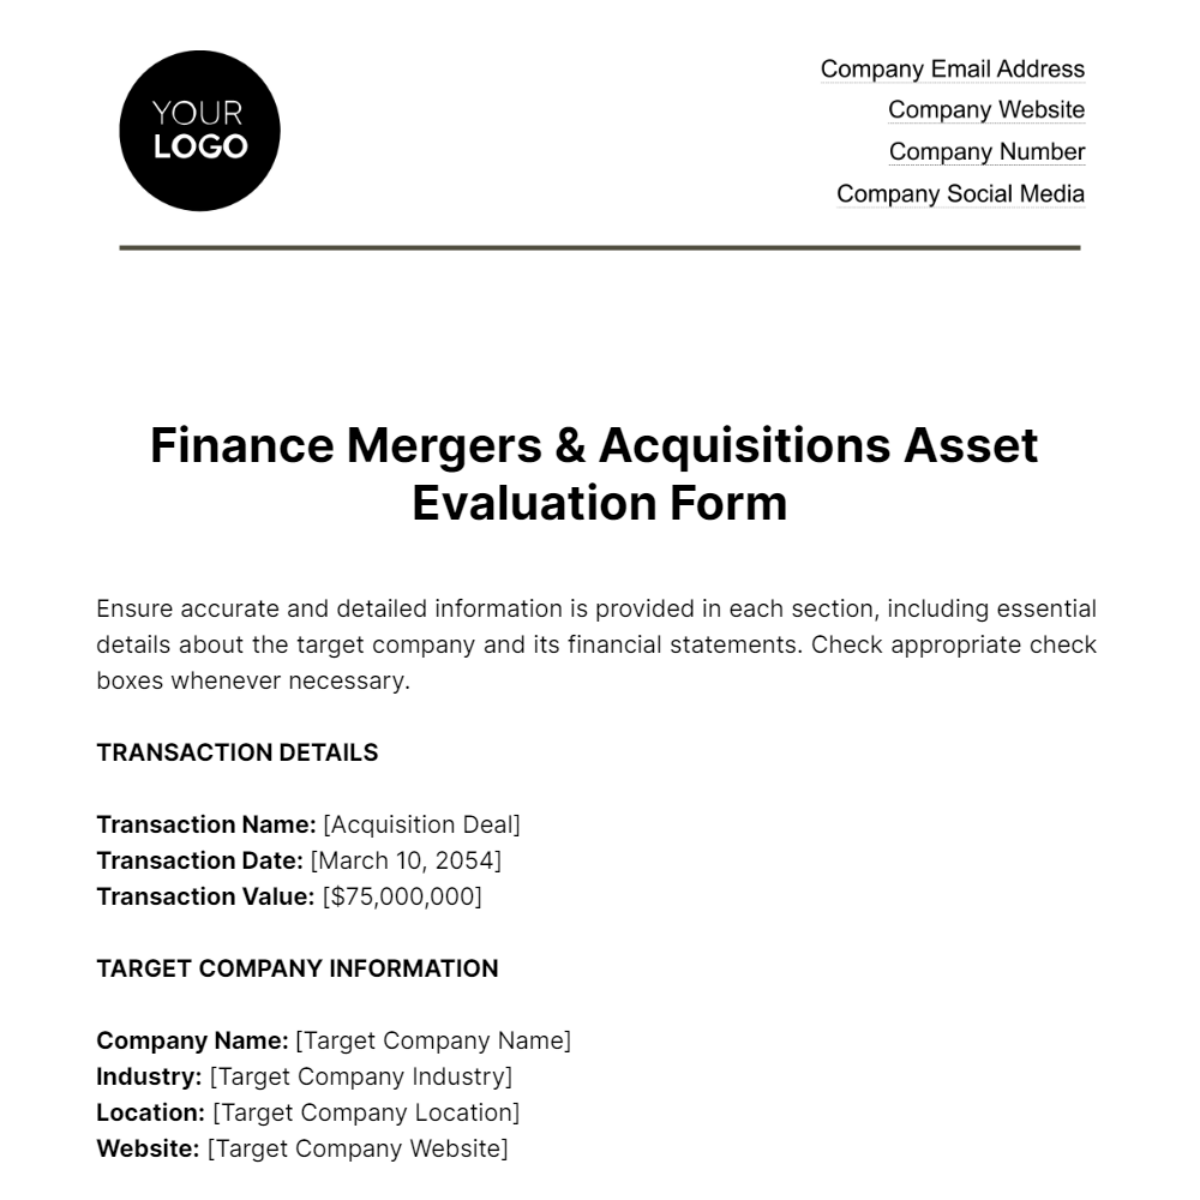 Free Finance Mergers & Acquisitions Asset Evaluation Form Template